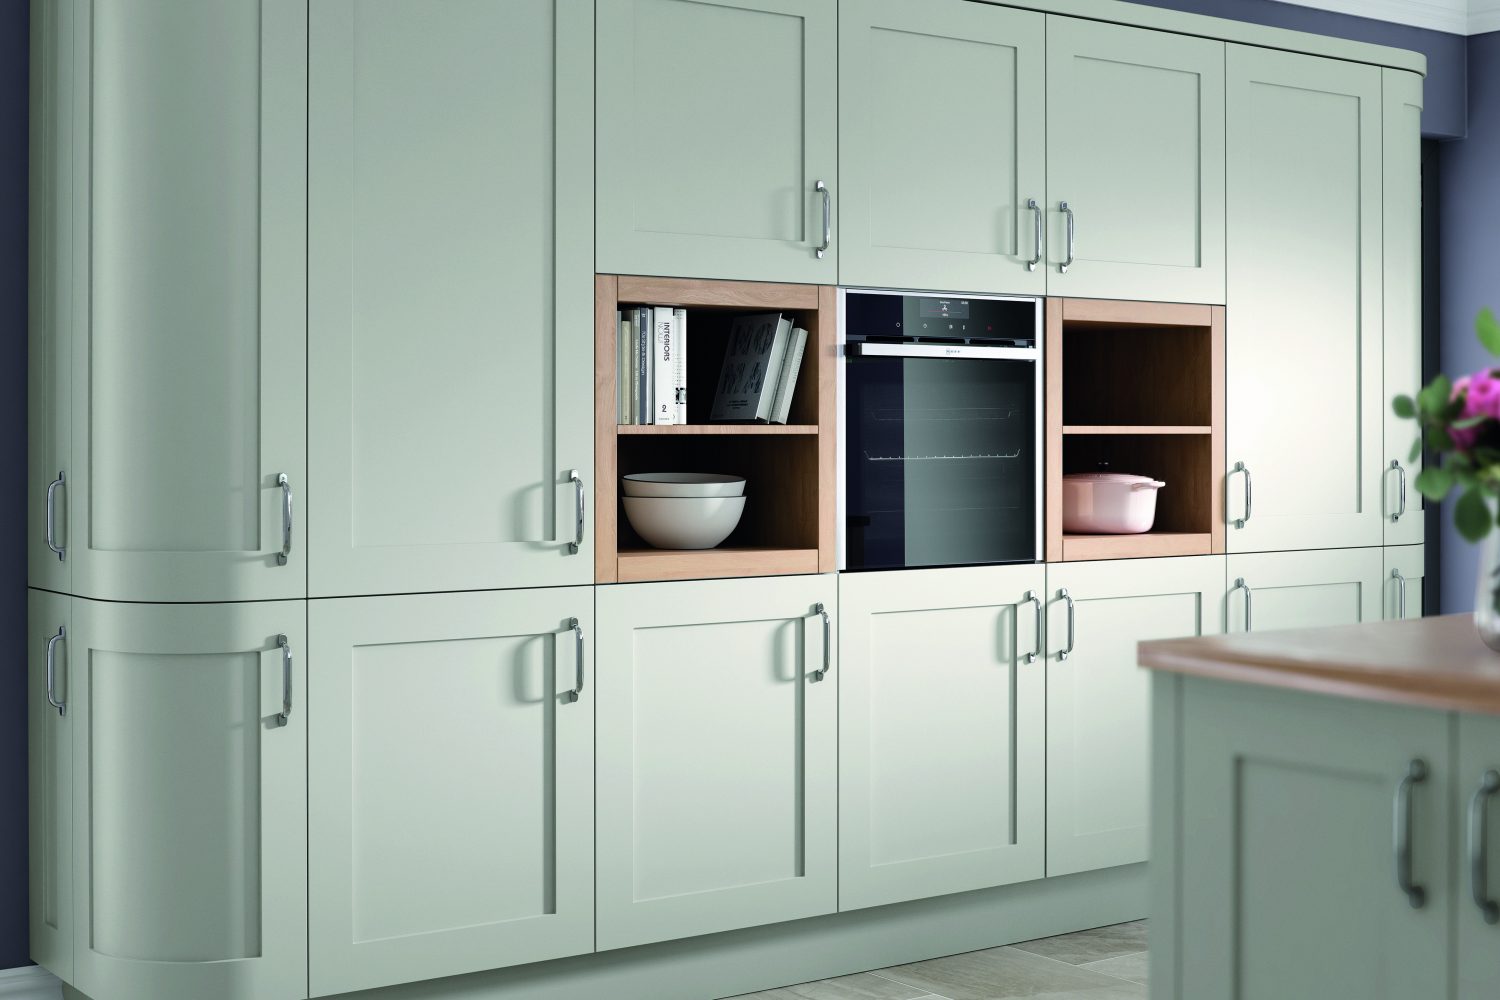 One wall of the Kitchen is showcased here, showcasing shaker light grey Olympia units. Tall larders with curved units are on the left, a singe over with open shelving either side are In the middle and one curved tall unit is on the other side. The walls are dusty grey with cashmere slabbed tiling on the floor. There are cook books, a large ivory casserole dish and 8 cook books on the open shelving either side of the oven. The worktop on the kitchen island which is only slightly in view is wooden